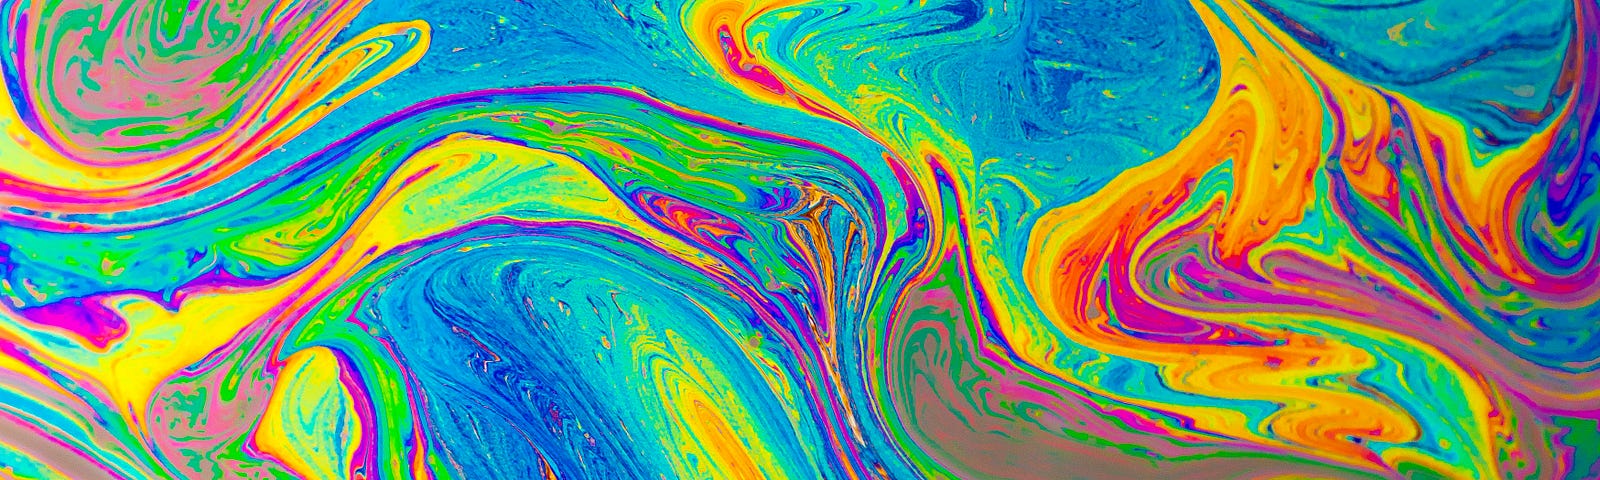 Swirling colors, abstract